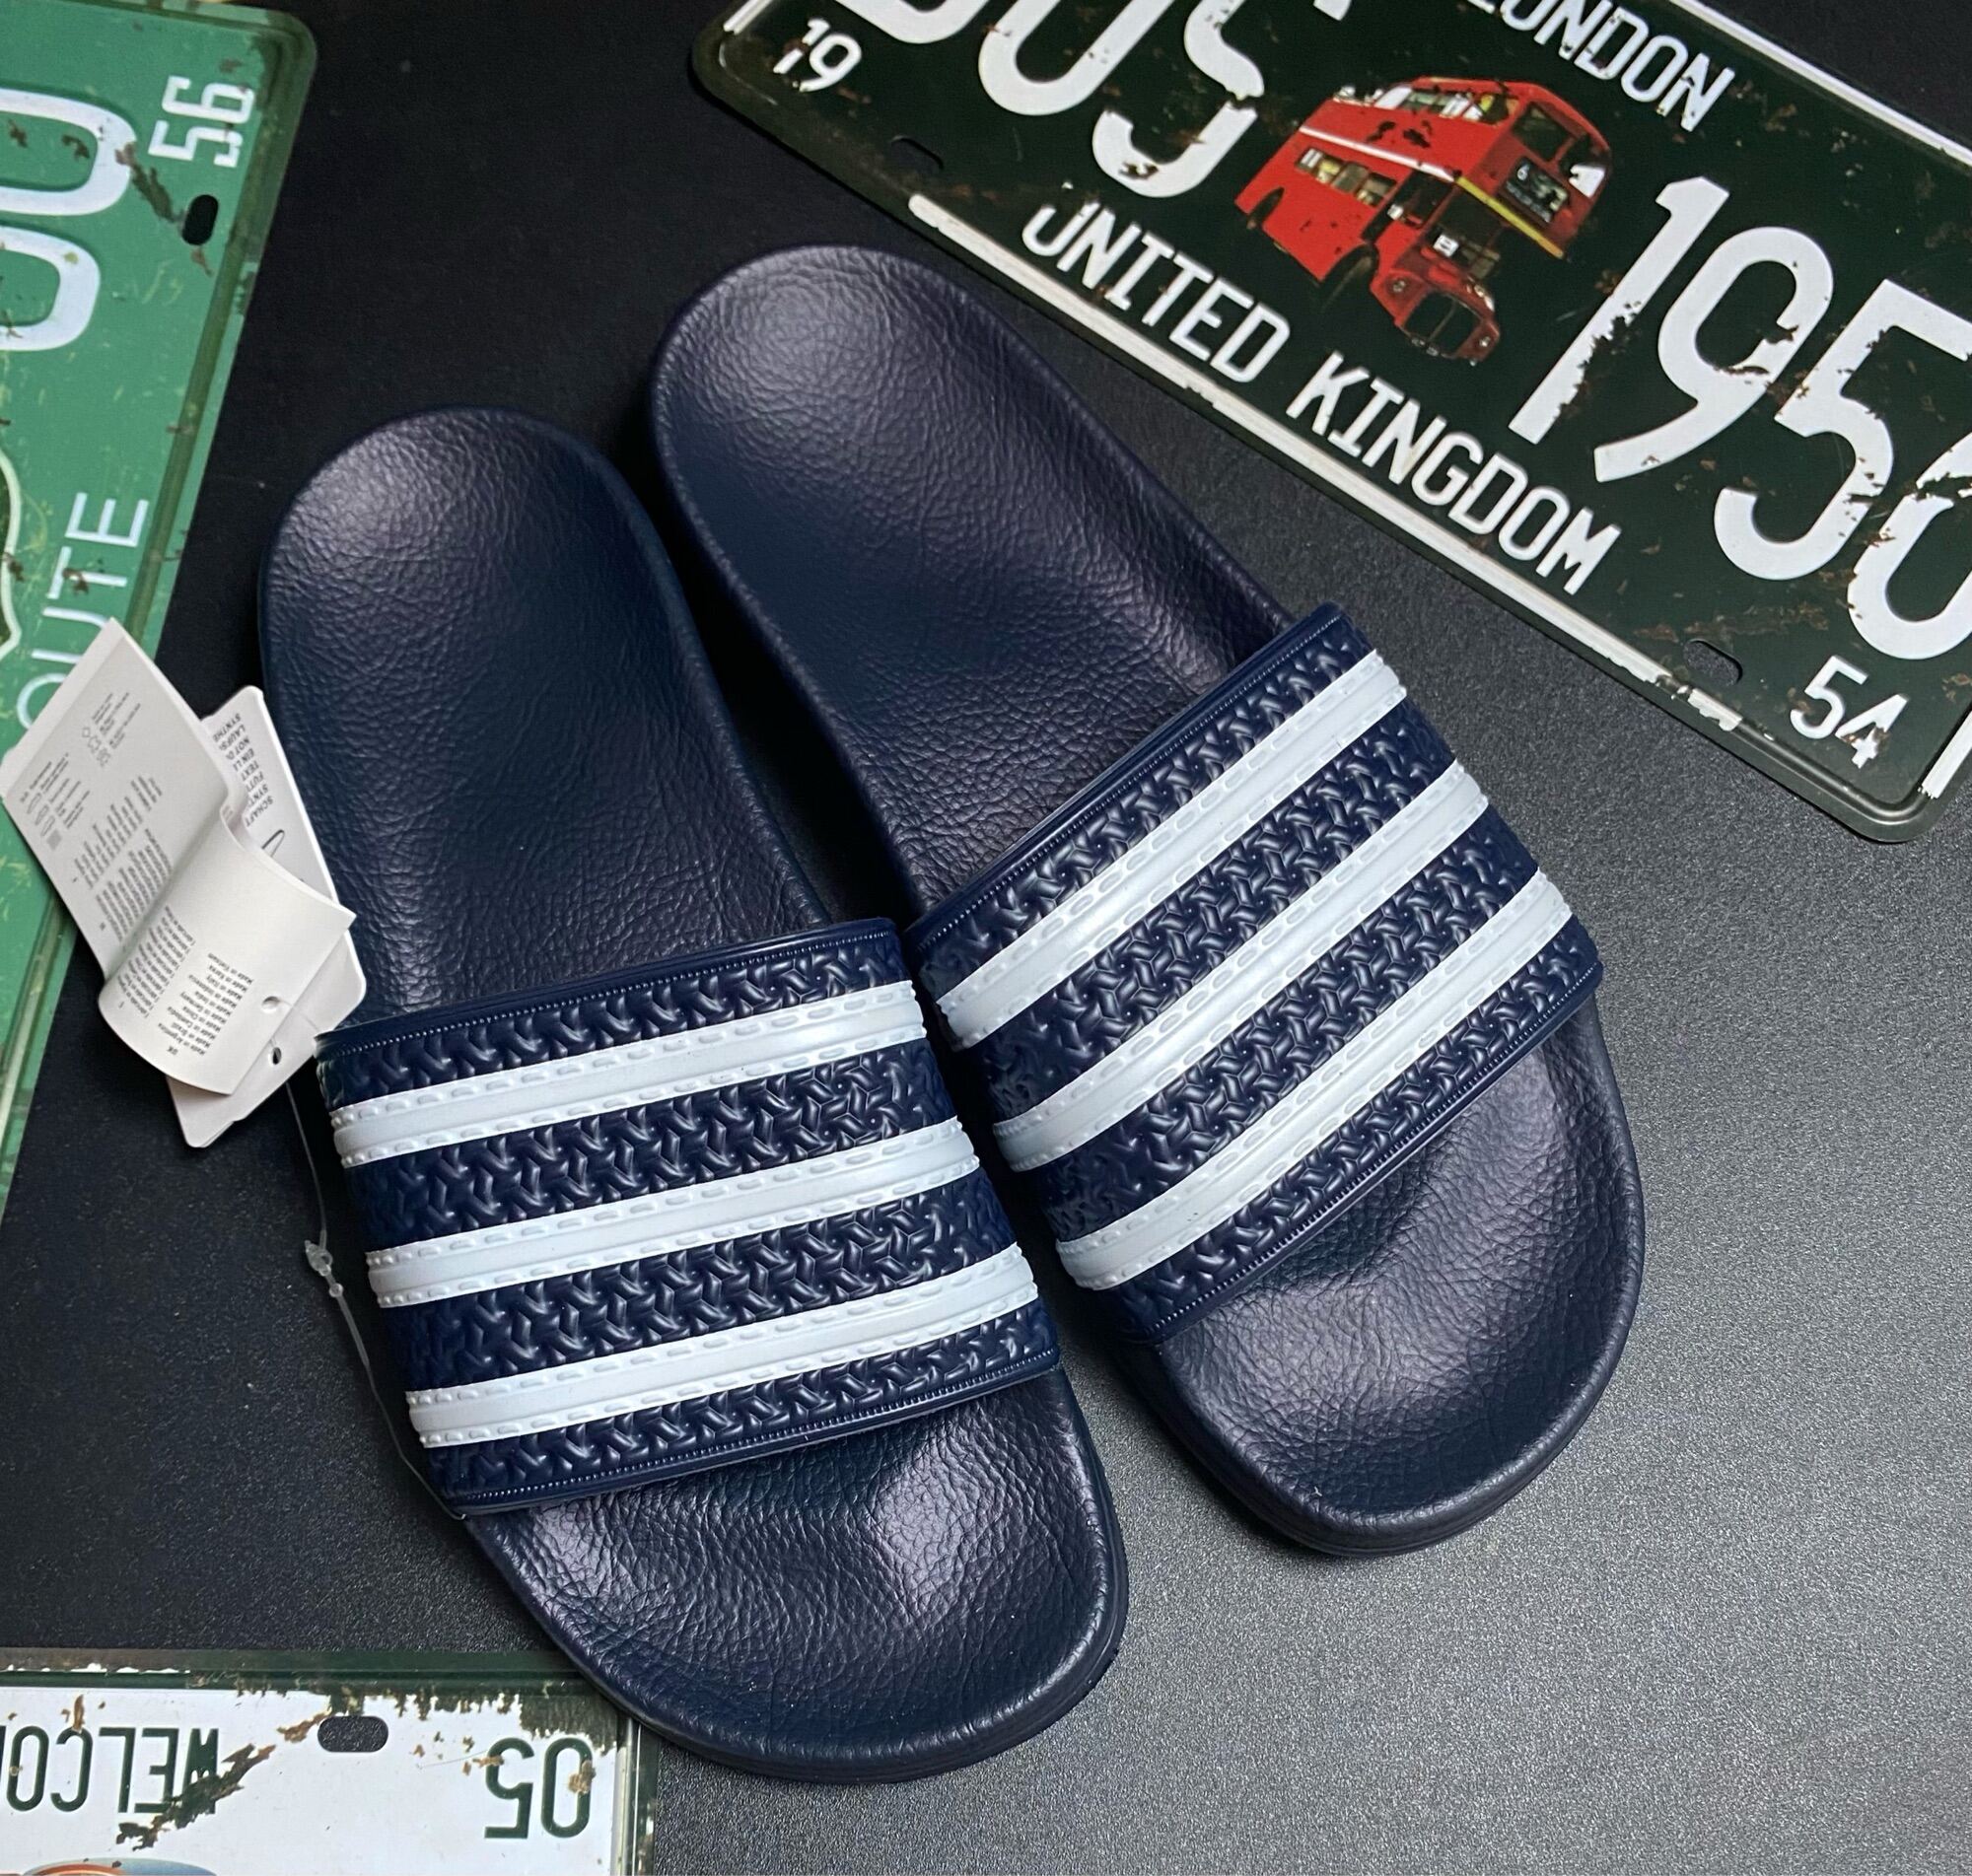 Italy Đế blue striped white-sandals nam-dép female-sandals Adilette classic-feeling quiet foot anti-water well